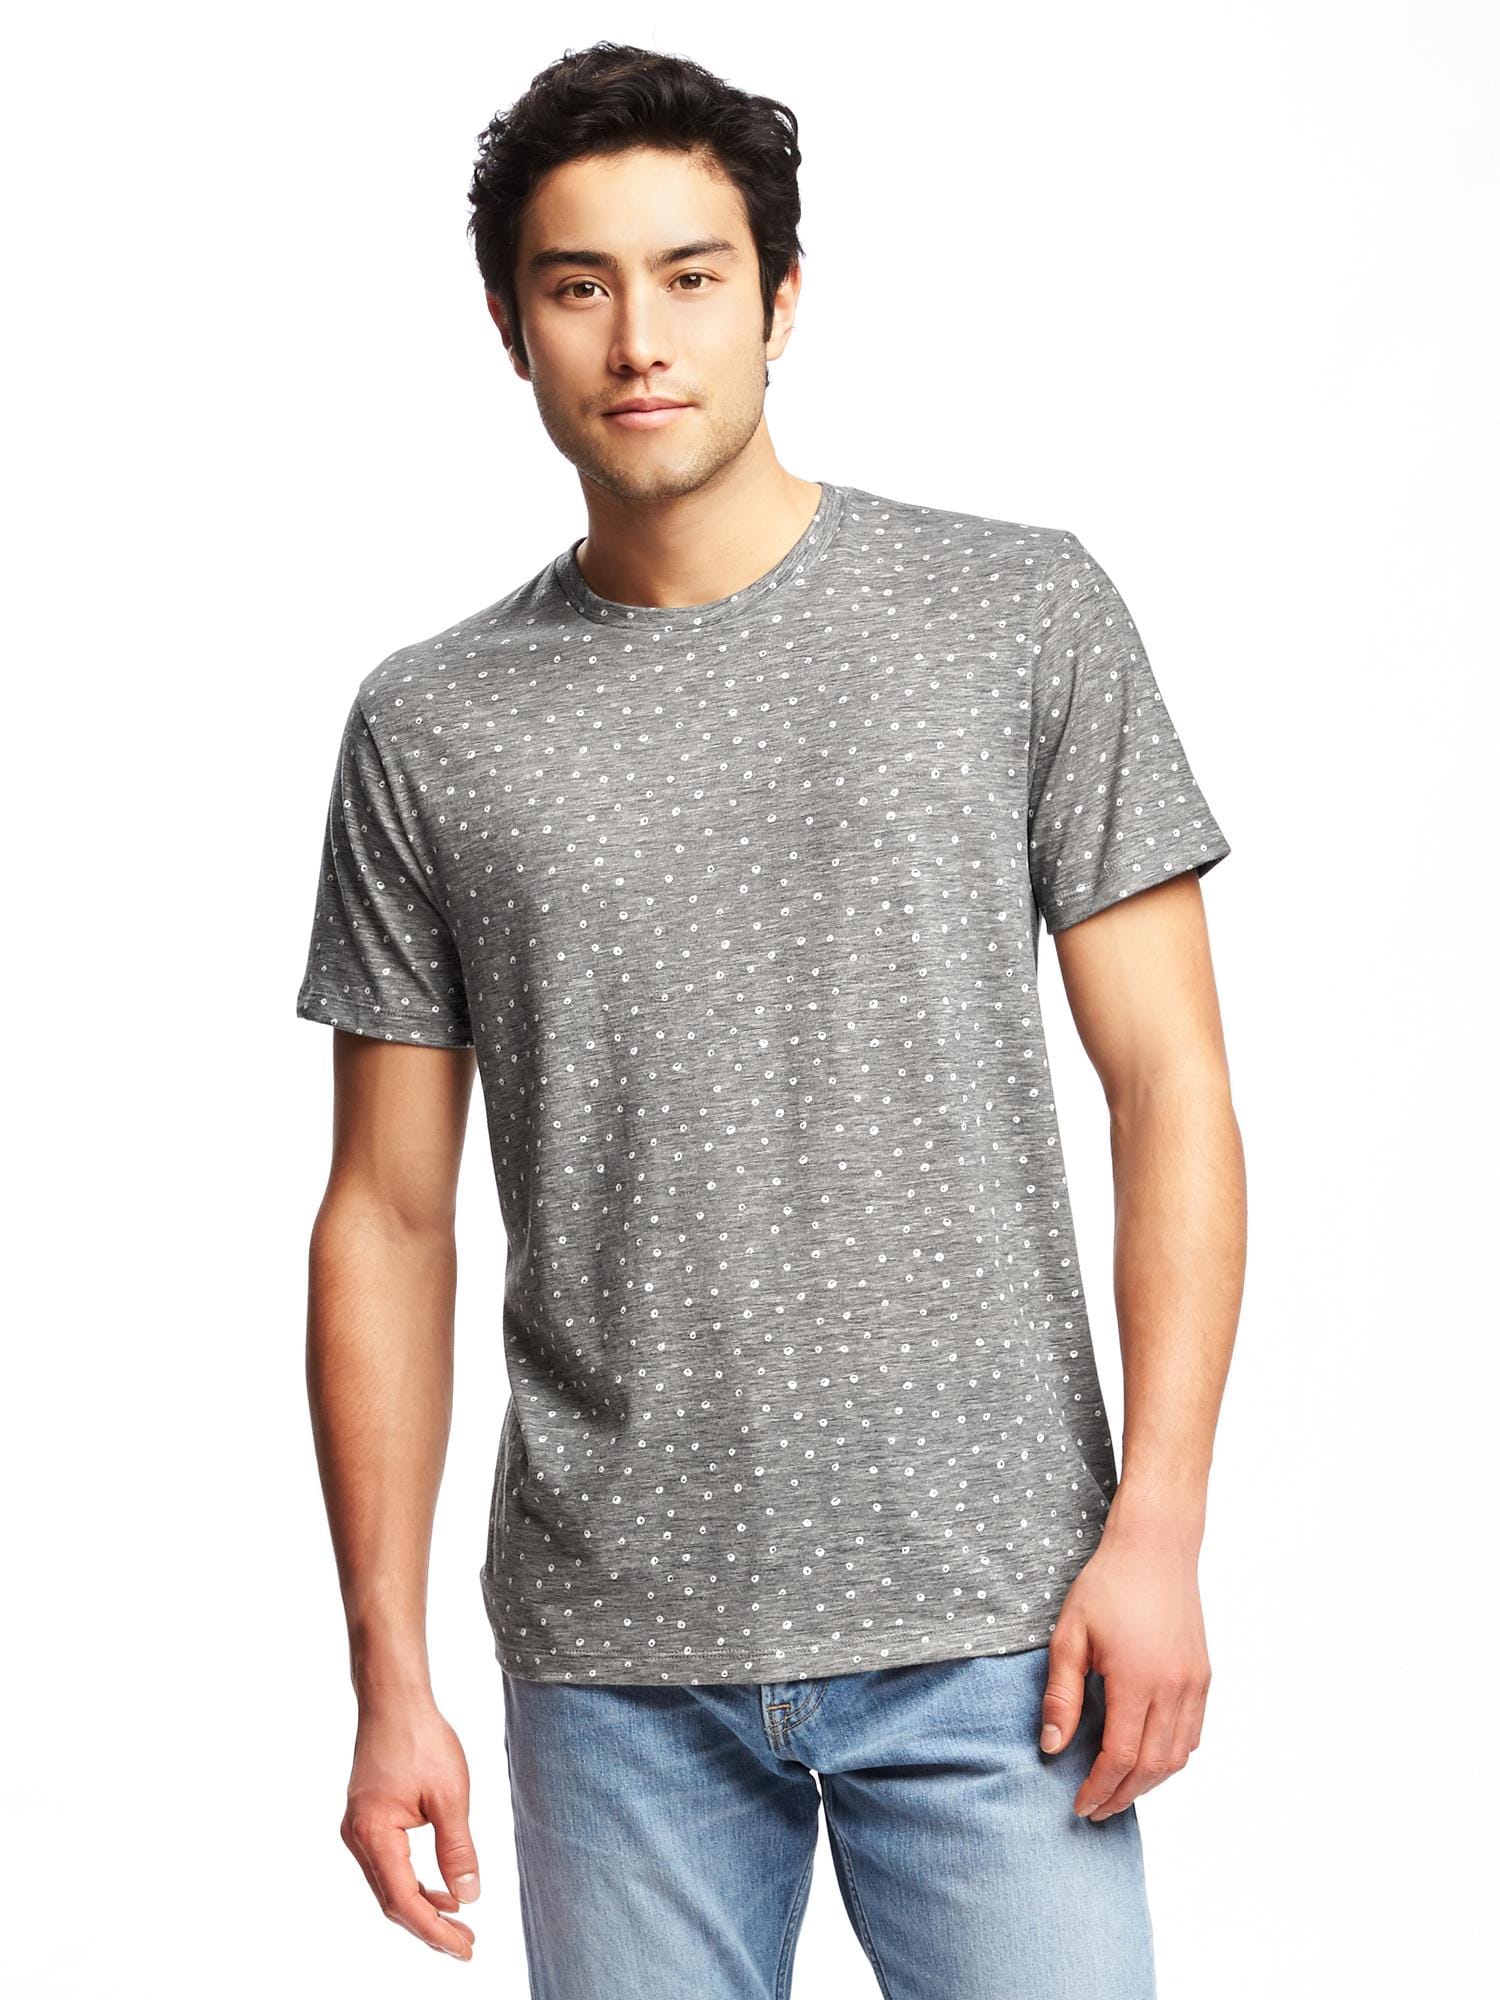 Patterned Crew-Neck Tee for Men | Old Navy